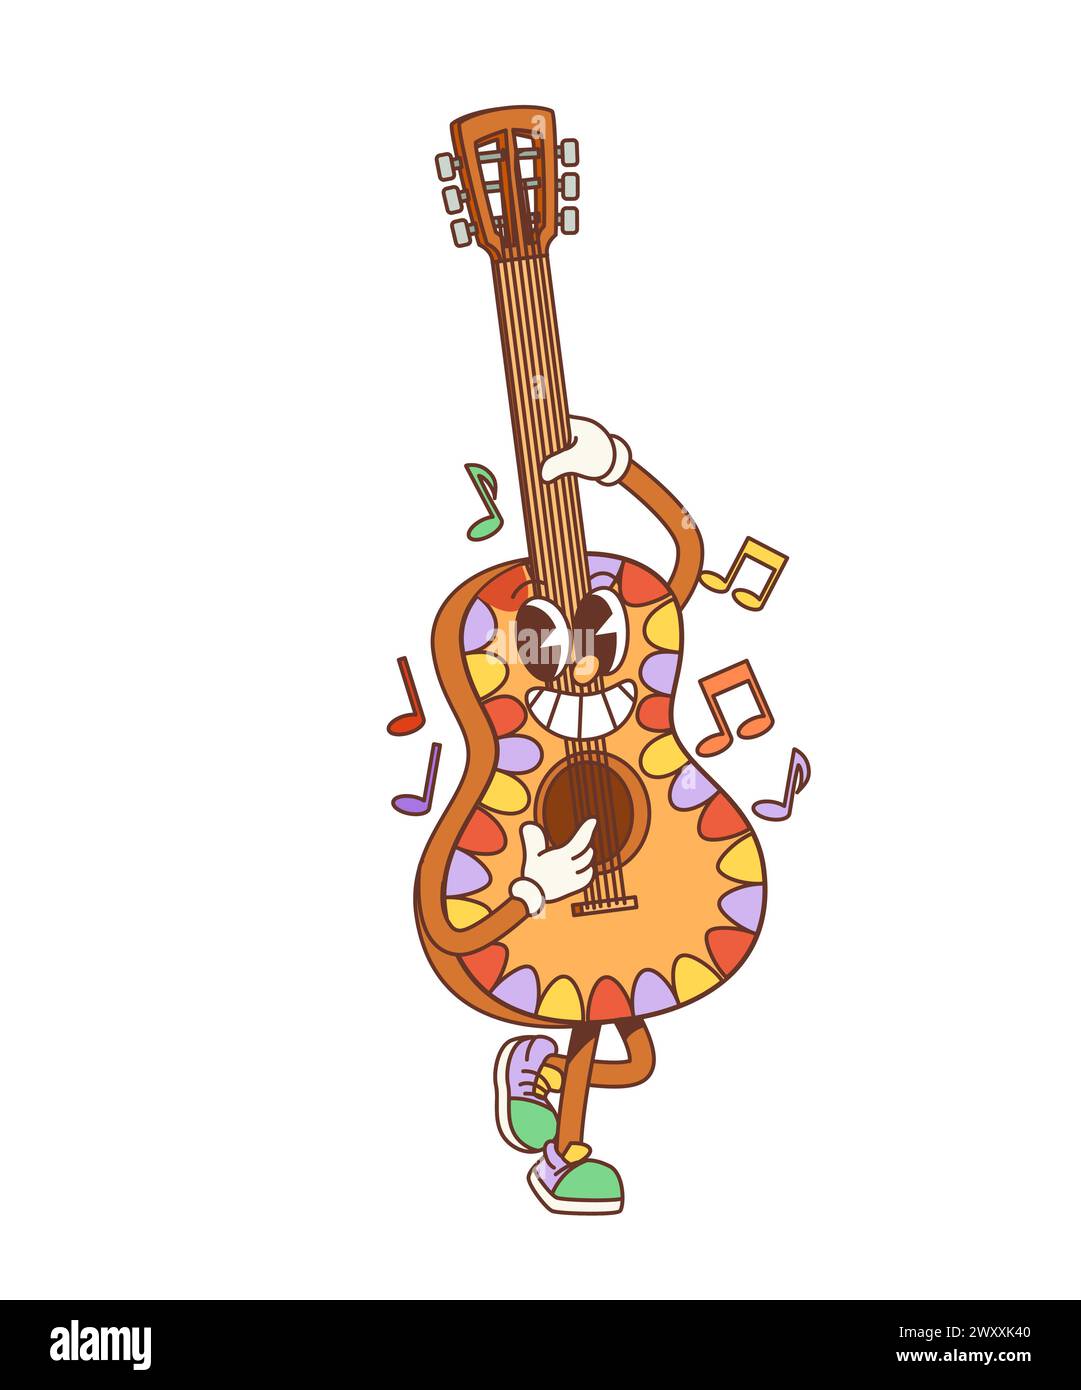 Retro cartoon groovy guitar character. Isolated vector funky guitarron personage with psychedelic pattern and musical notes, exudes 70s vibes with a cool, laid-back attitude and vibrant musical energy Stock Vector